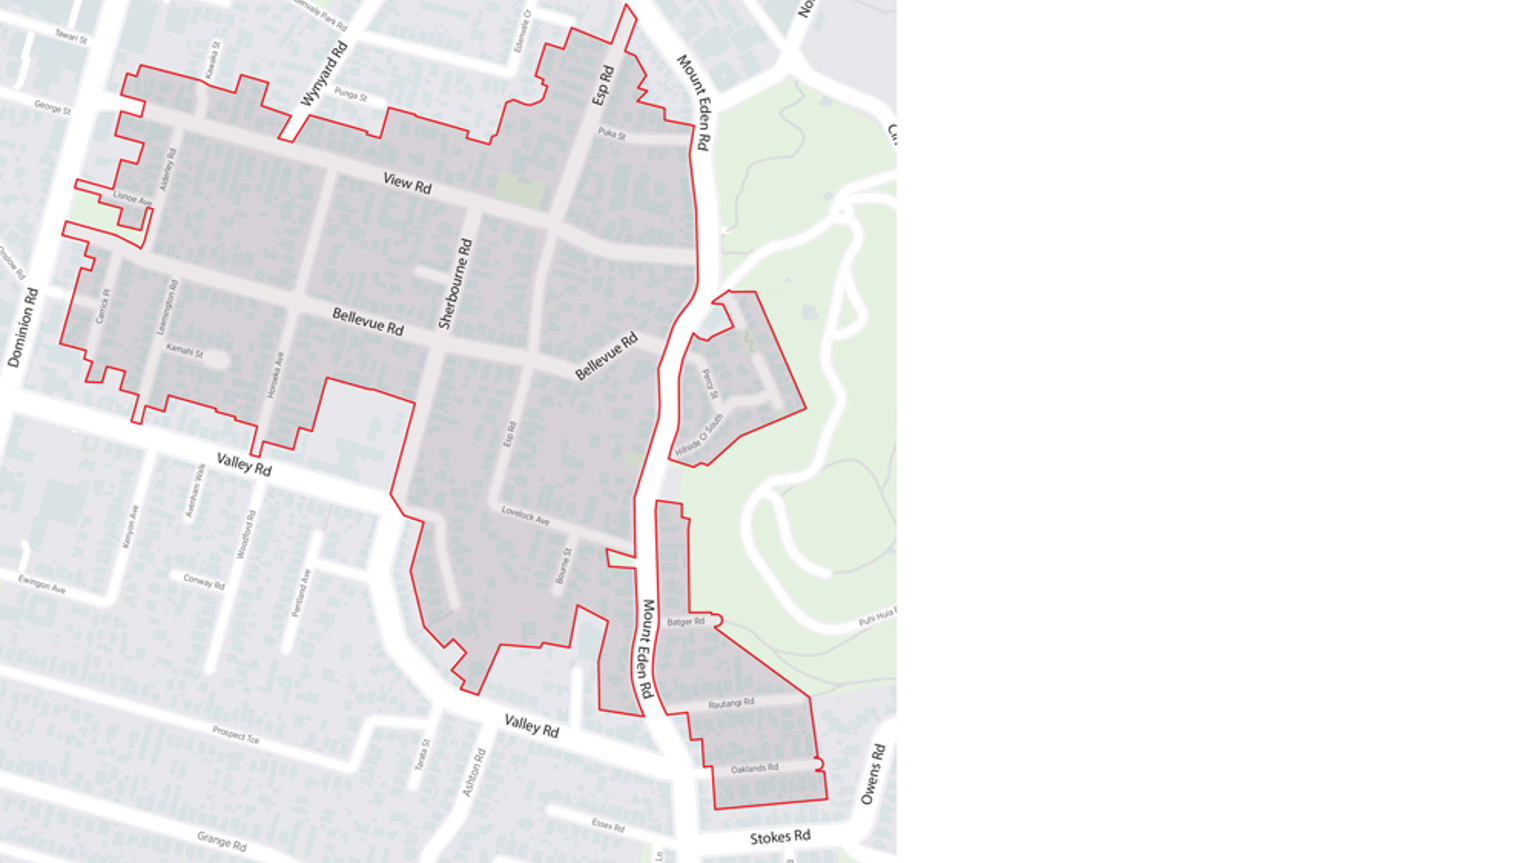 Map of Mount Eden Central with the resident parking zone boundaries indicated with red lines.